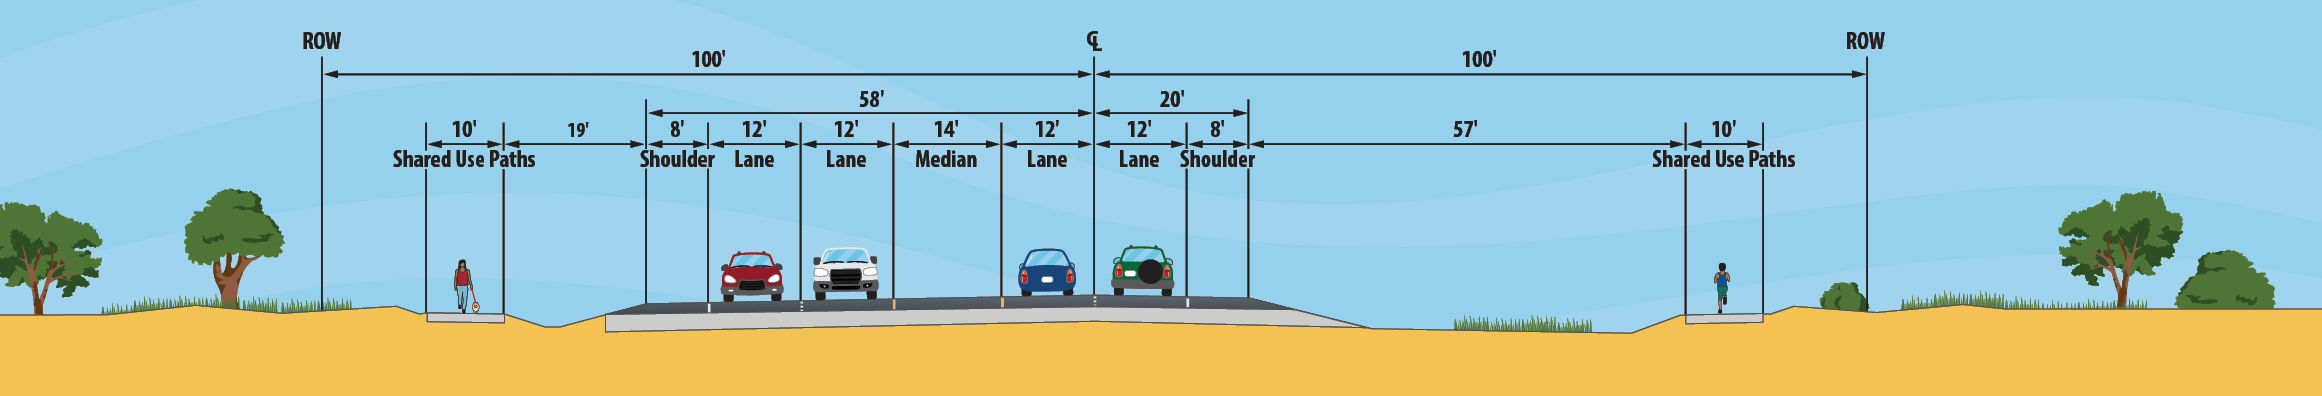 Typical cross section showing 200-foot area that includes right of way, two 10-foot shared use paths, two 8' shoulders, two 12-foot travel lanes in each direction, one 14 foot median, grass, trees, and sky.